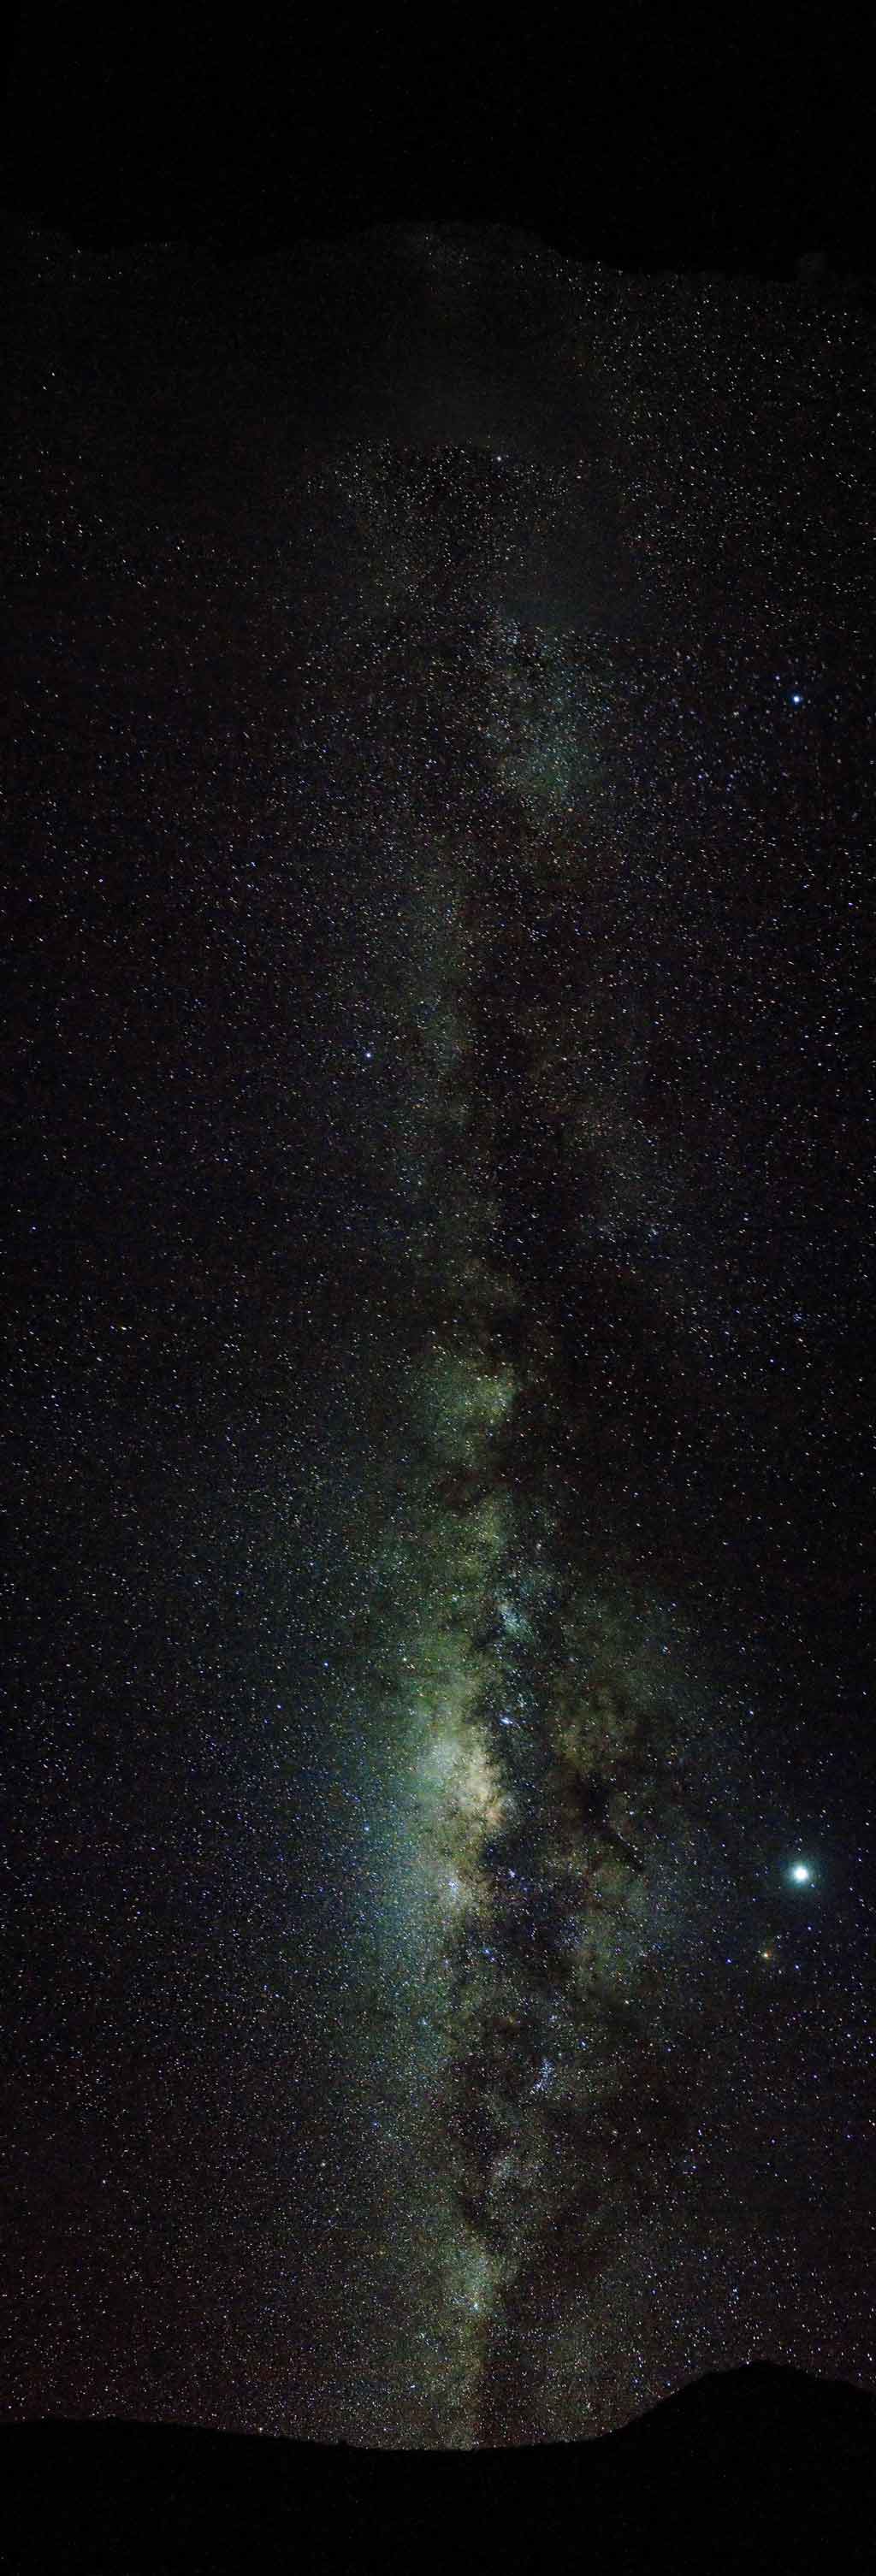 Milk Way over Perù: 183 KB; click on the image to enlarge